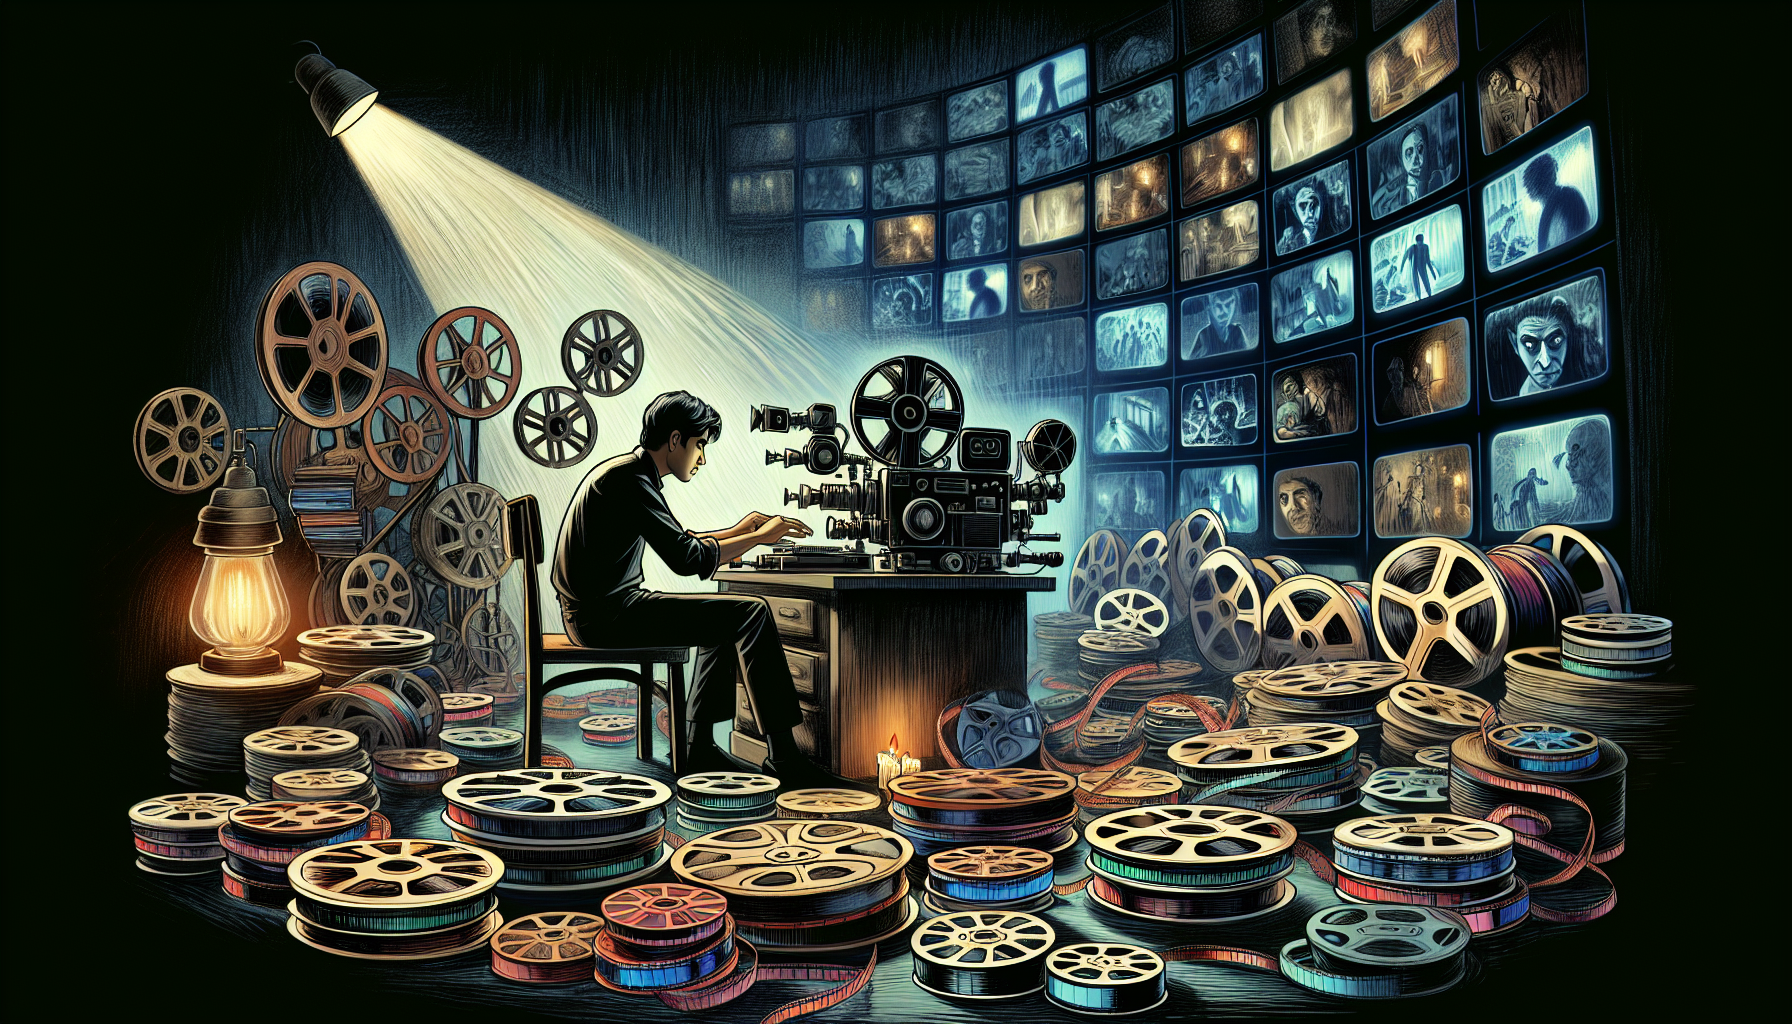 An artist in a dimly lit studio, surrounded by cascading reels of vintage film and modern digital cameras, intently piecing together a found footage horror film on multiple screens, each displaying ee